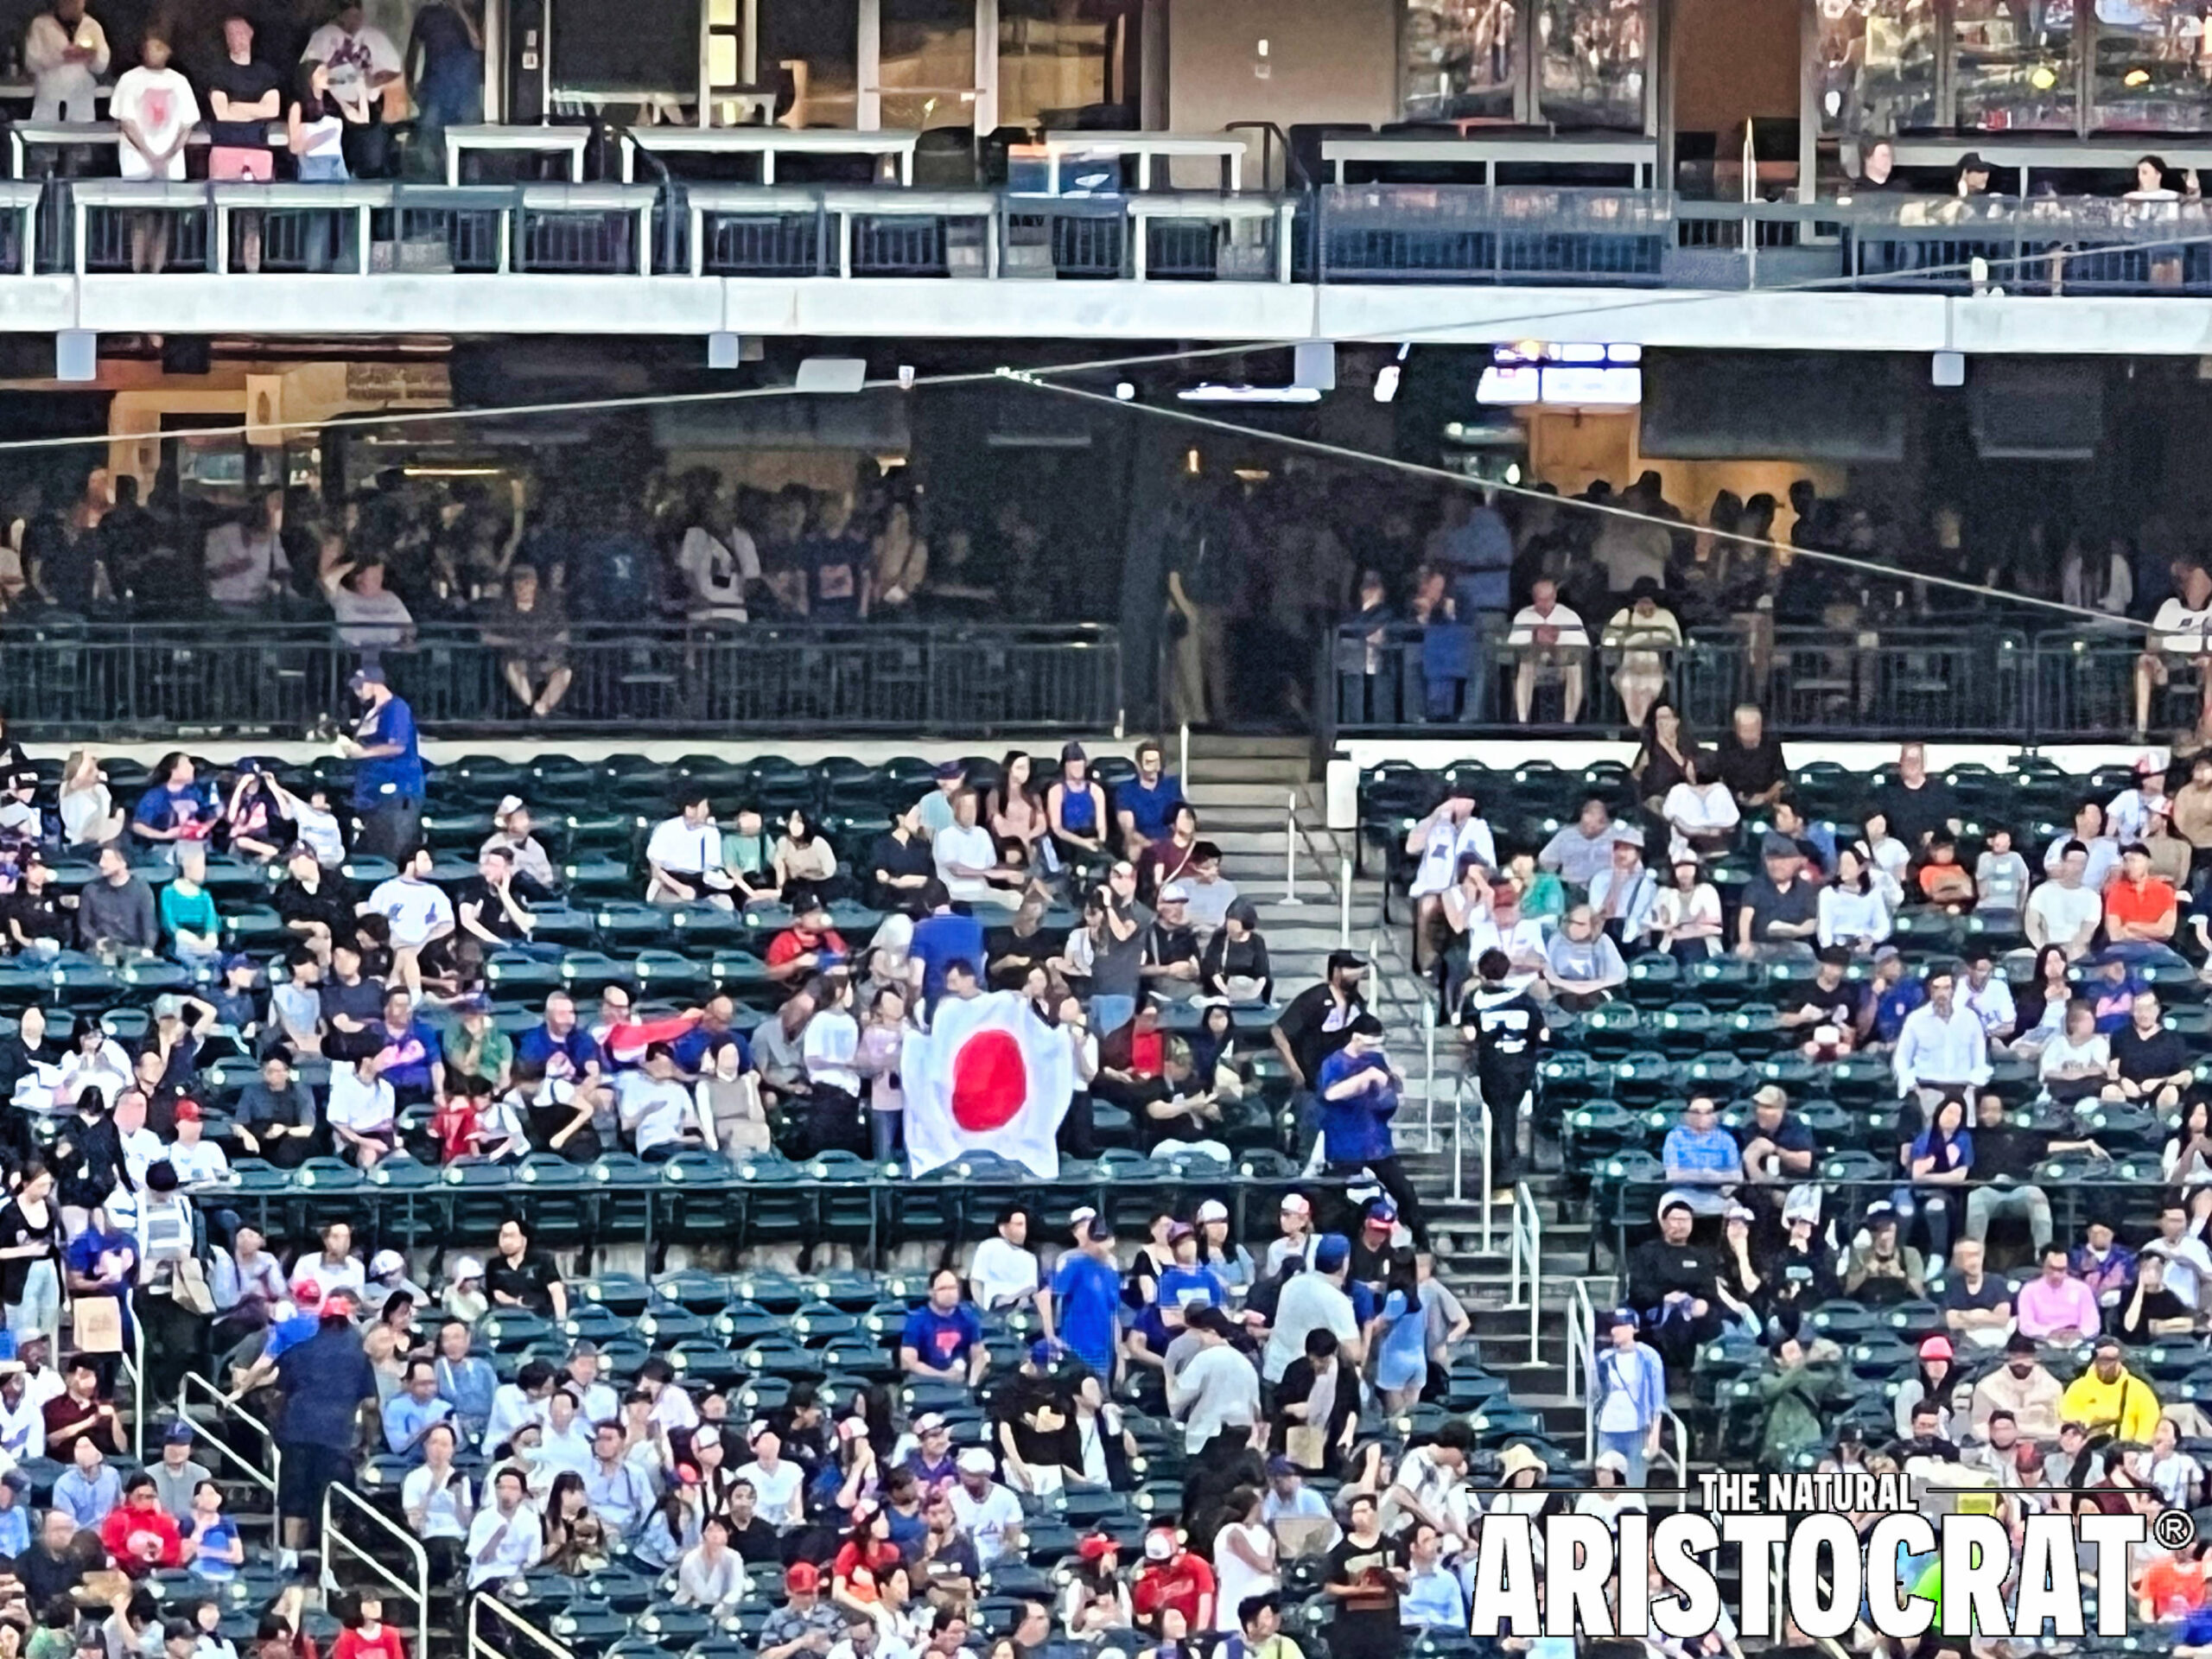 New York Mets fans hold up Japan flag during Citi Field's Japanese Heritage Night. Photo Credit: The Natural Aristocrat® - Nir Regev